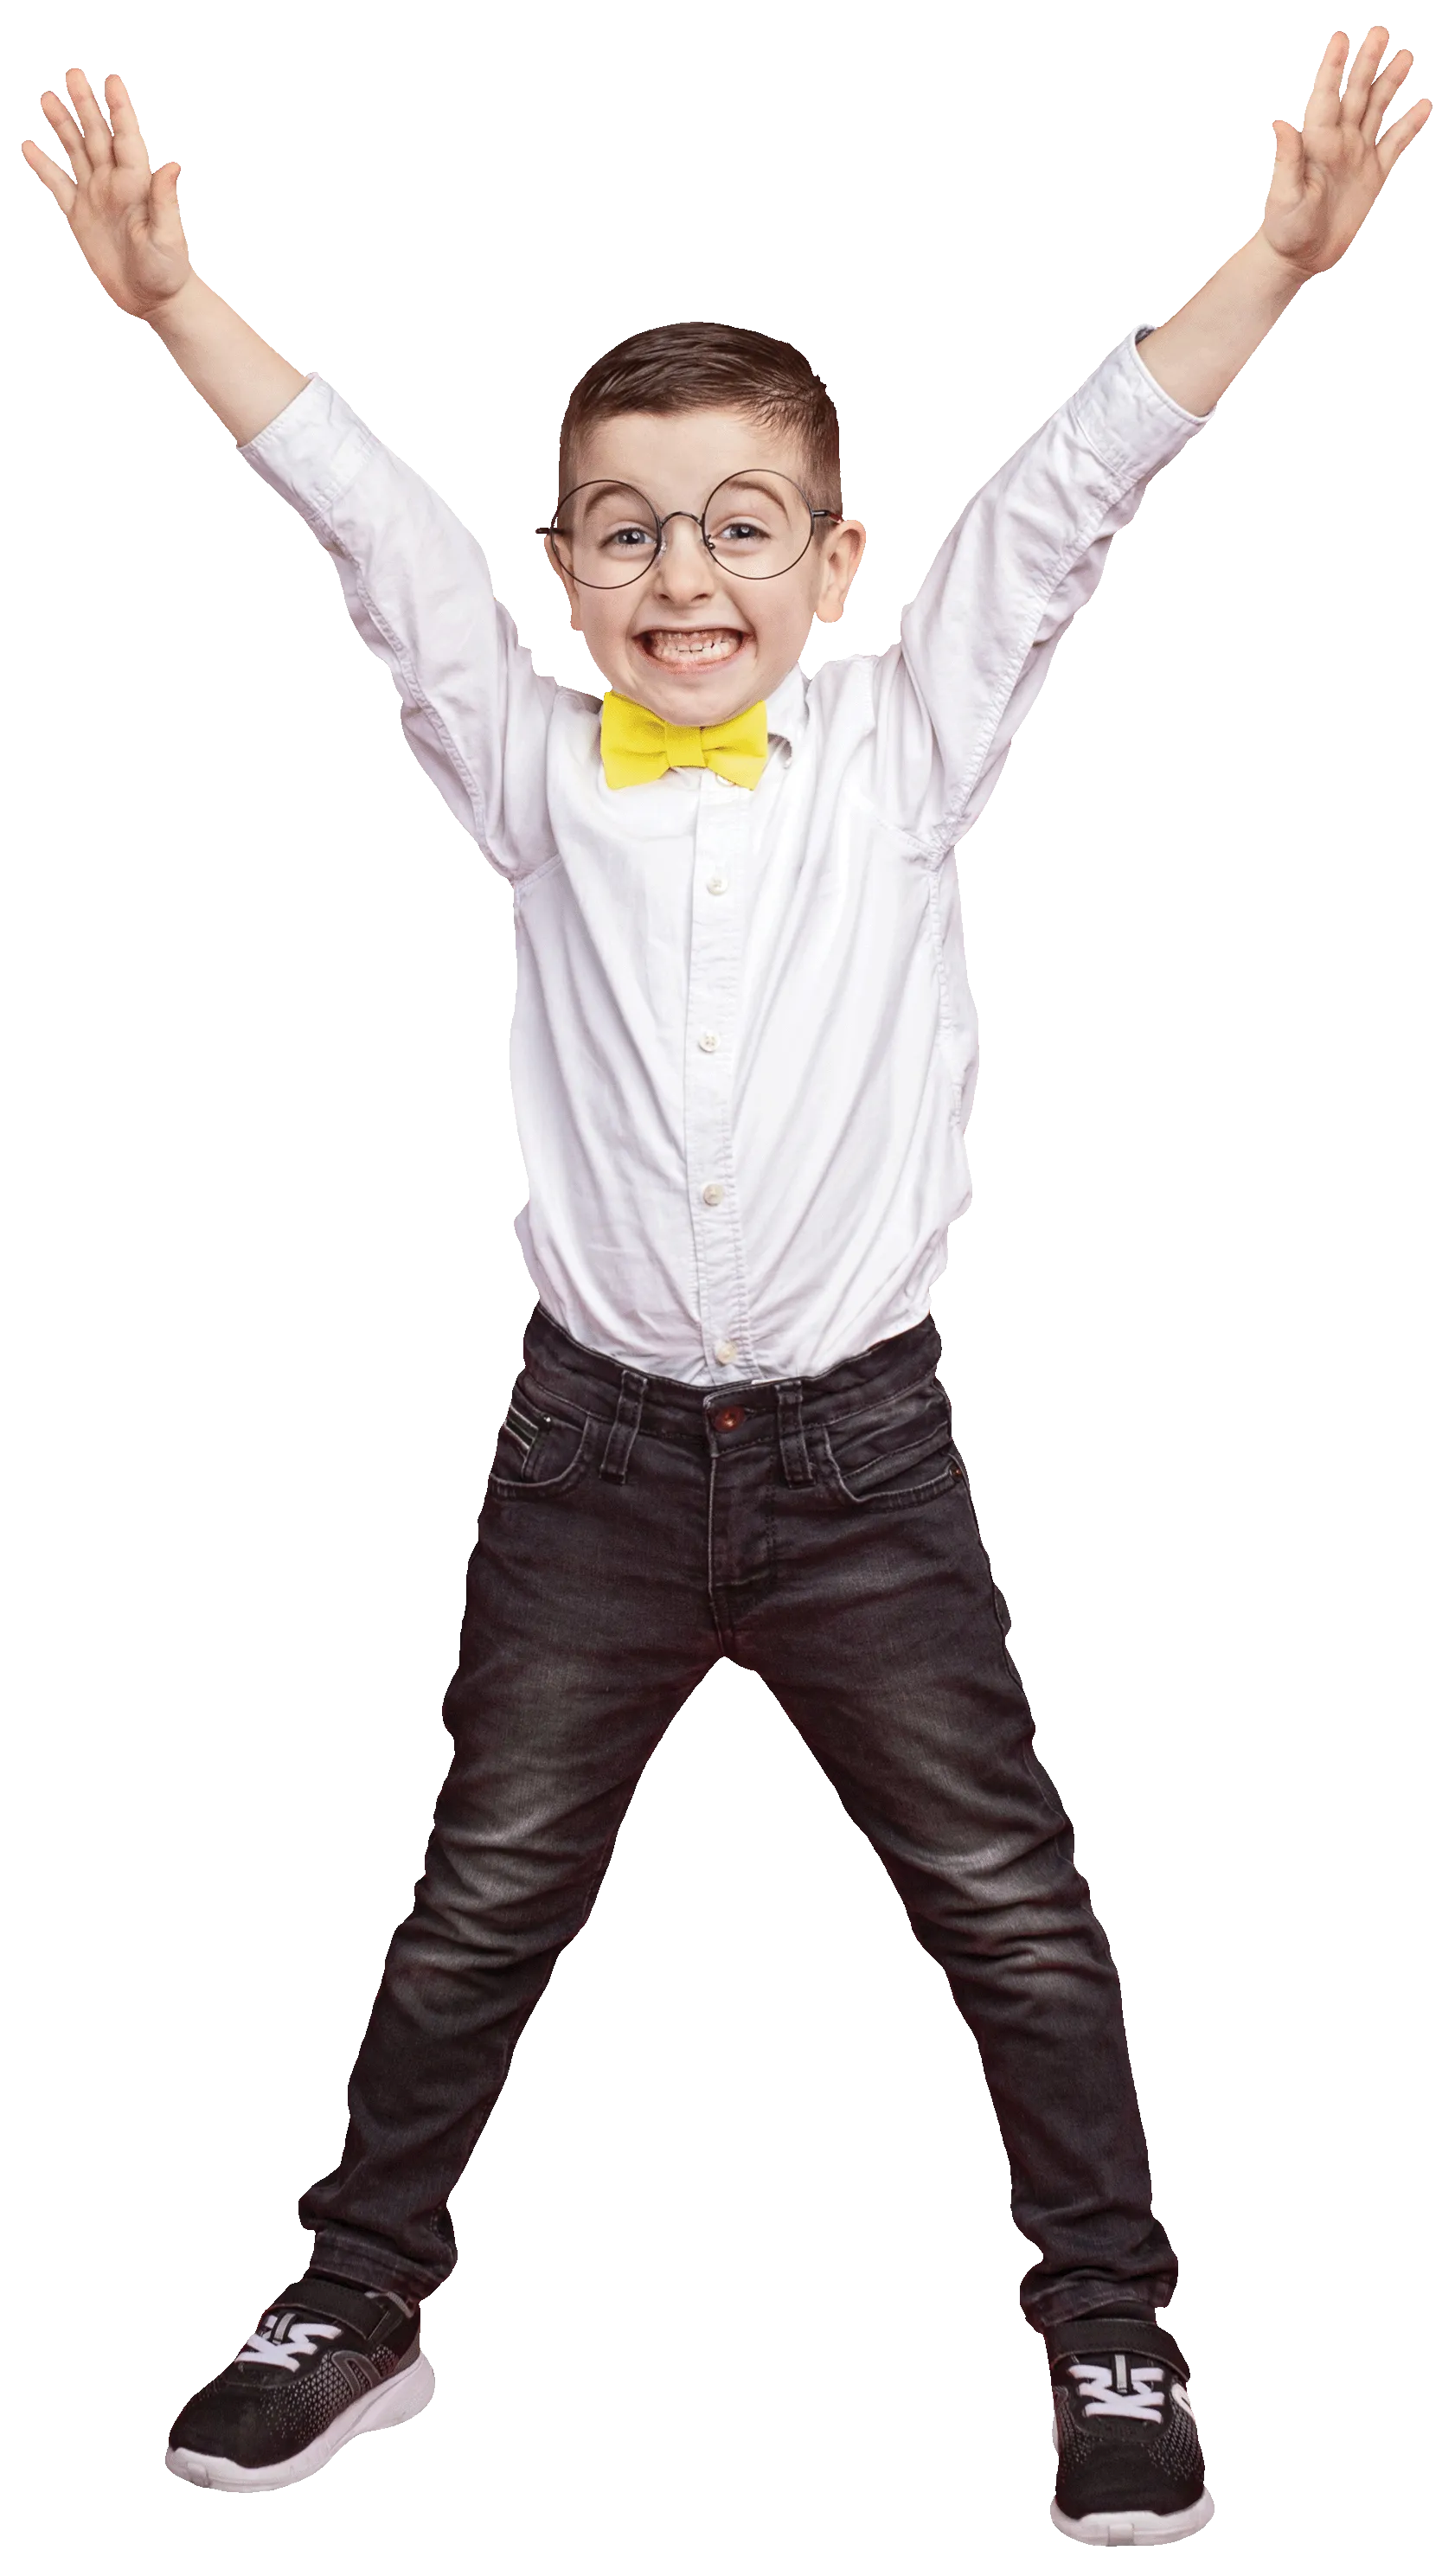 Young boy raises his hands posing for a picture